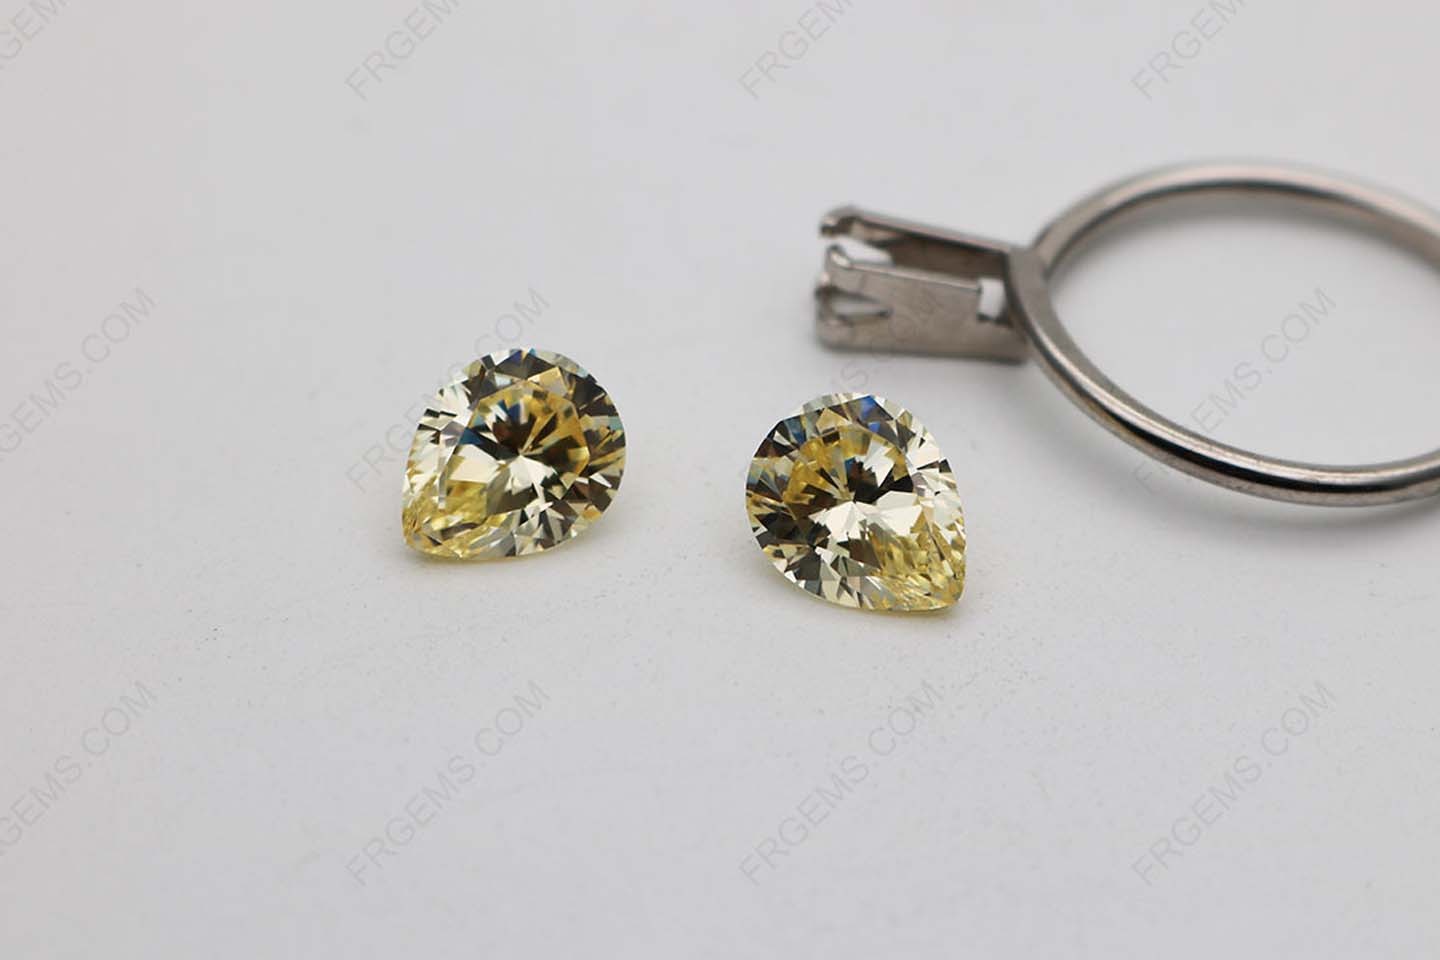 Cubic Zirconia Canary Yellow Pear Shape 5A Best Quality 10x7mm stones China Suppliers CZ06 IMG_2464